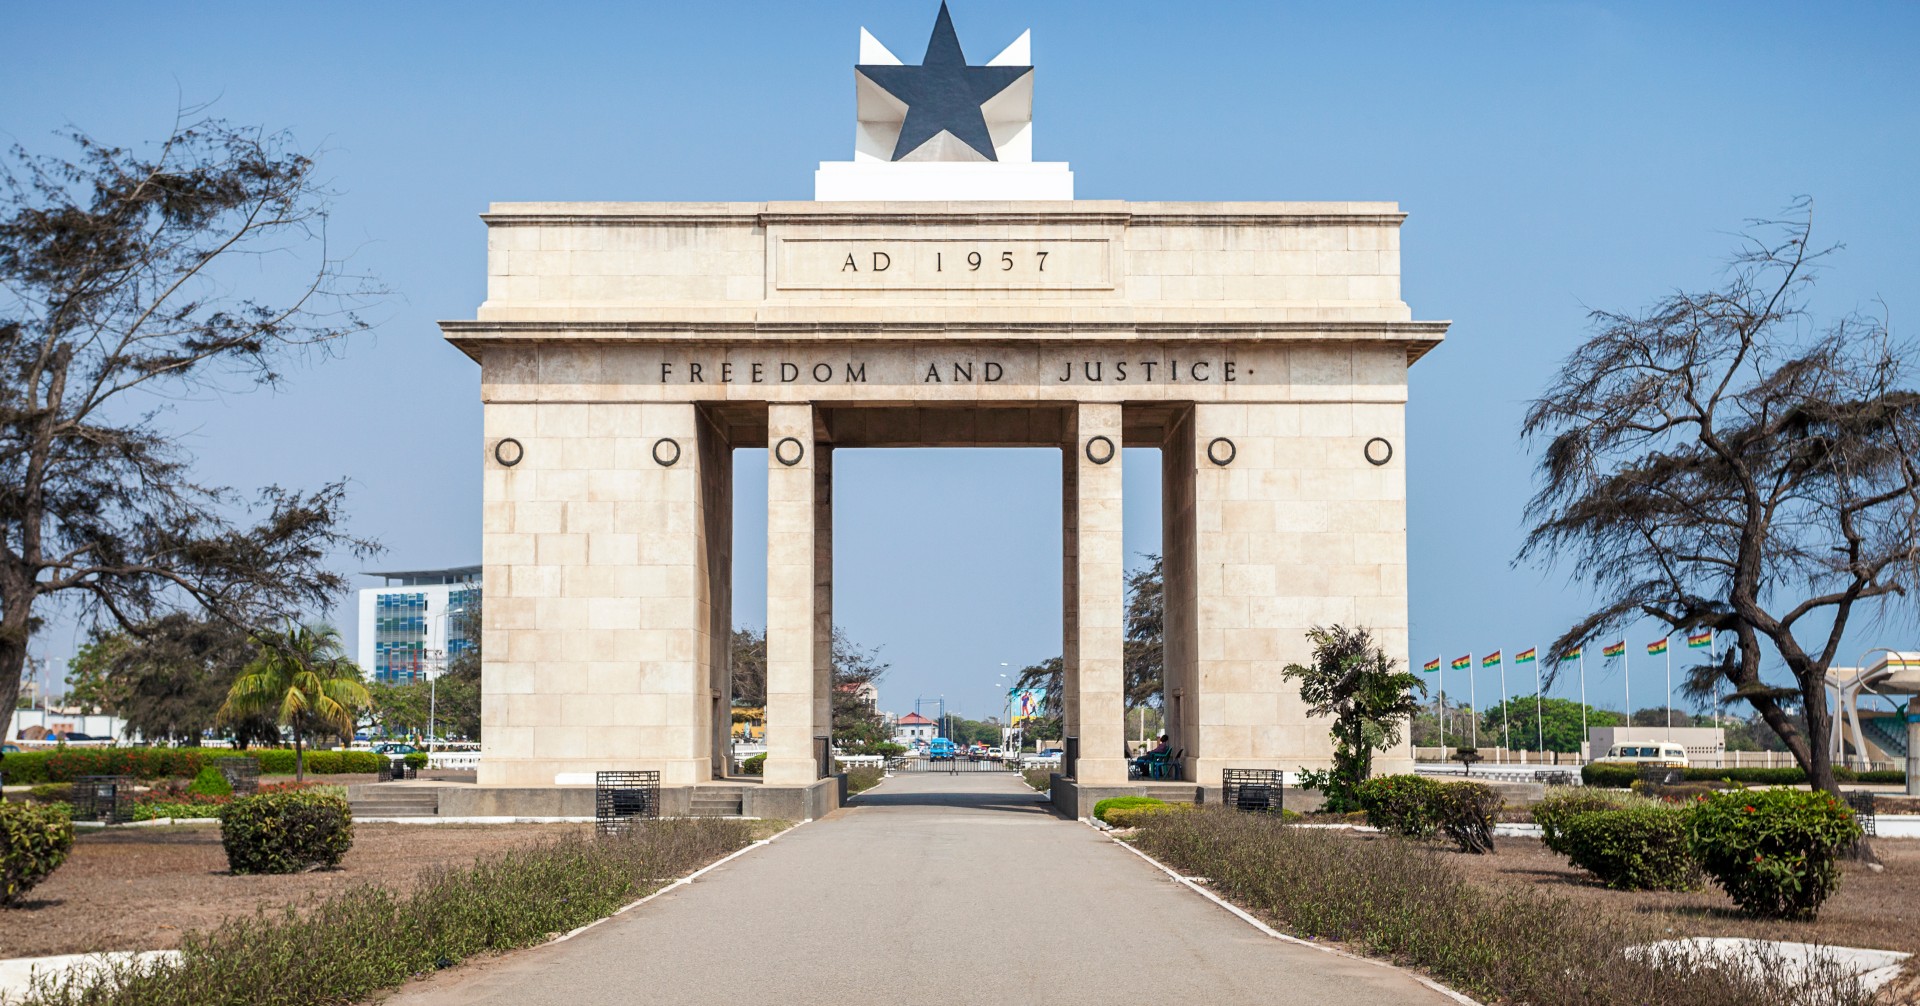 The Independence Arch in Ghana